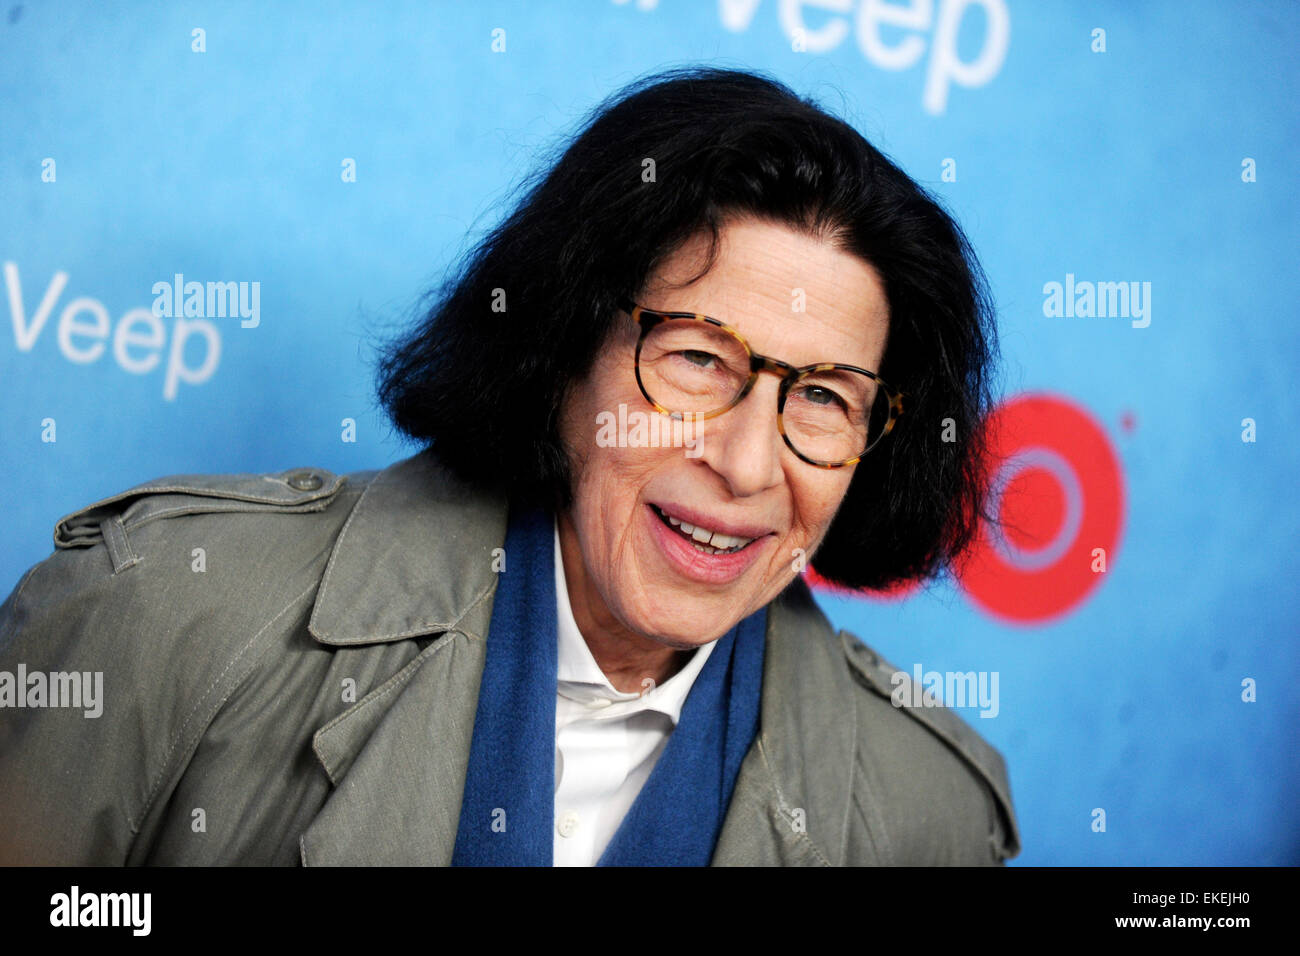 New York City. 6th Apr, 2015. Fran Lebowitz attends the 'VEEP' Season 4 Premiere at SVA Theater on April 6, 2015 in New York City./picture alliance © dpa/Alamy Live News Stock Photo